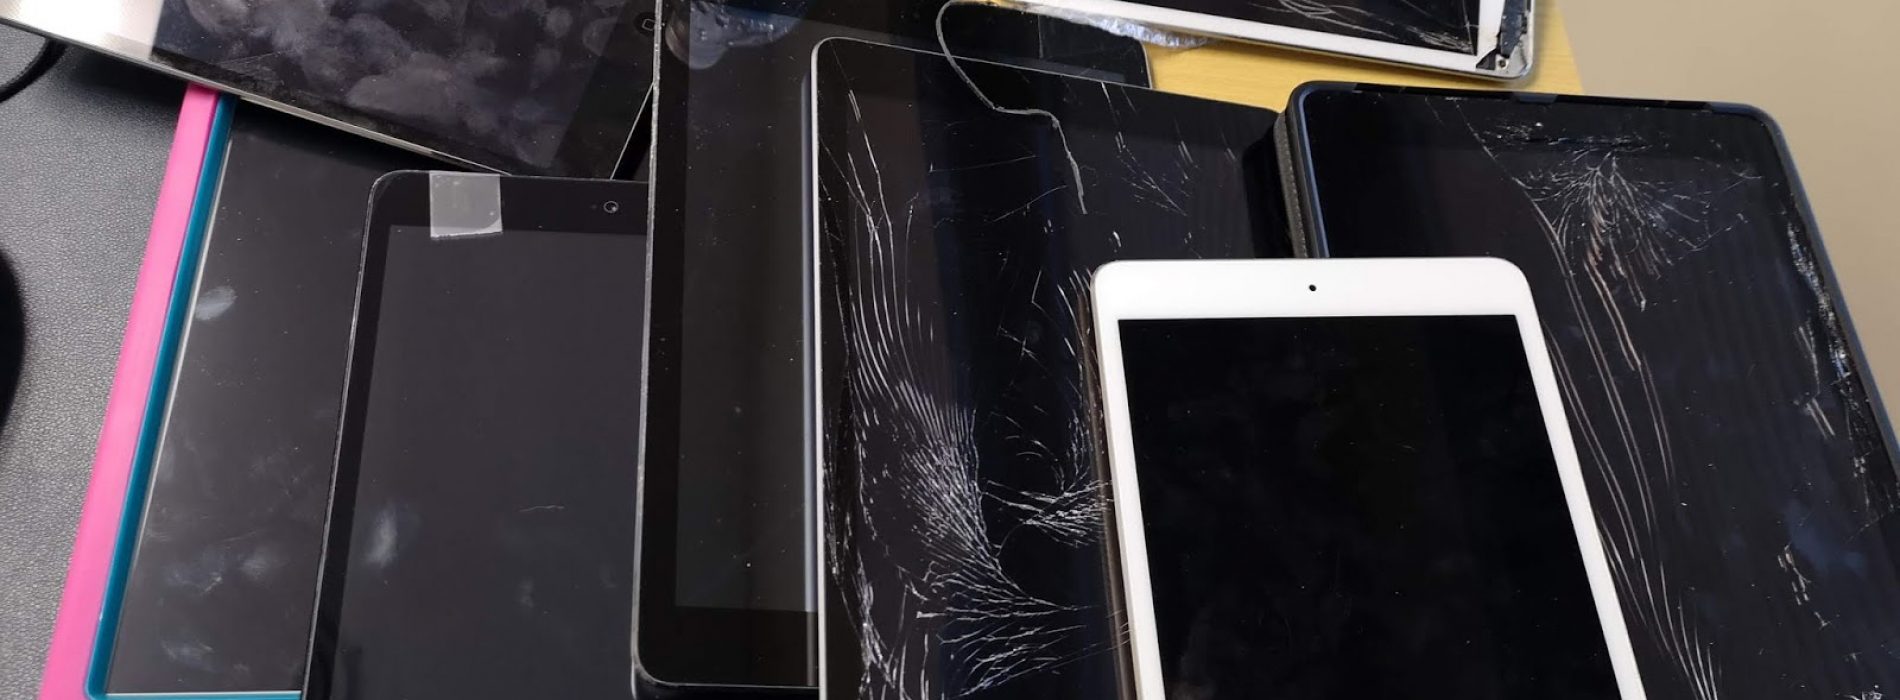 Secrets to reach to great business ideas for iPad screen repair